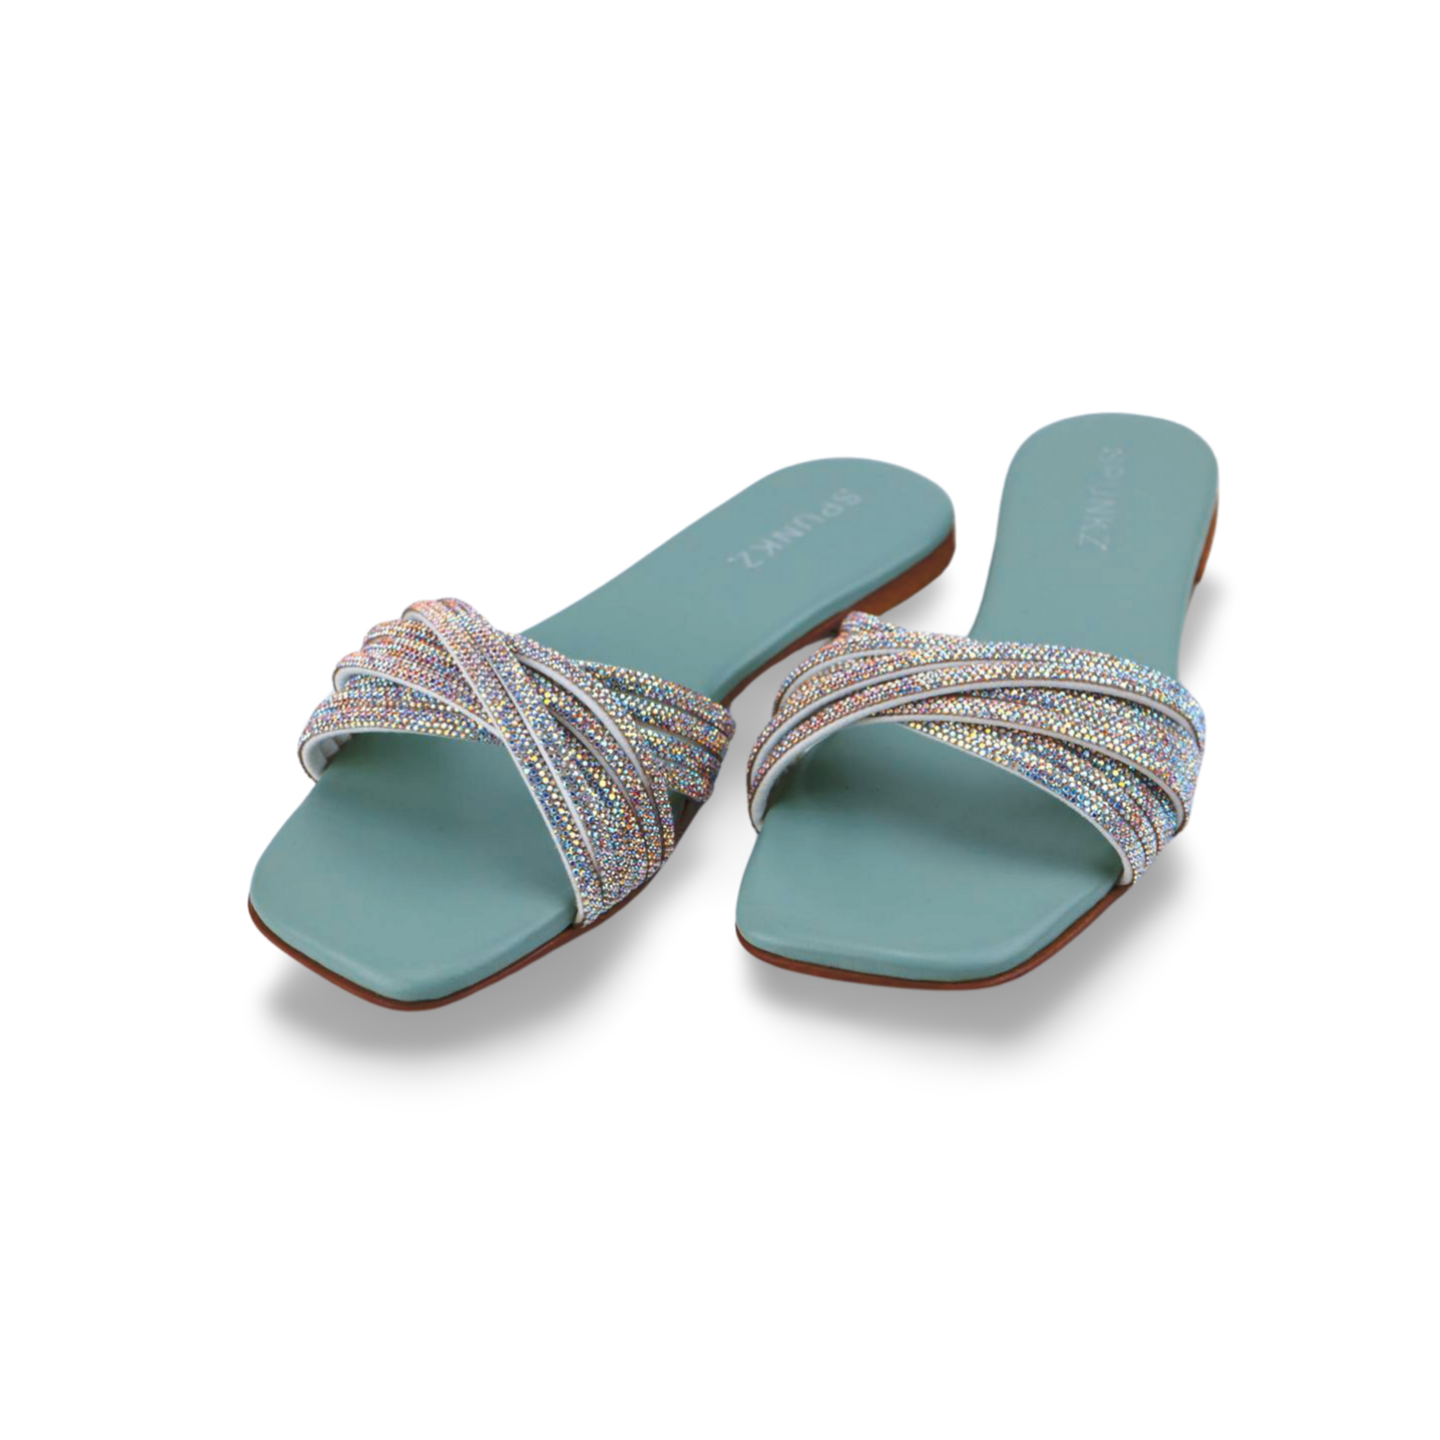 Women's Flat Slippers Sandals with Rhinestone embellished Upper